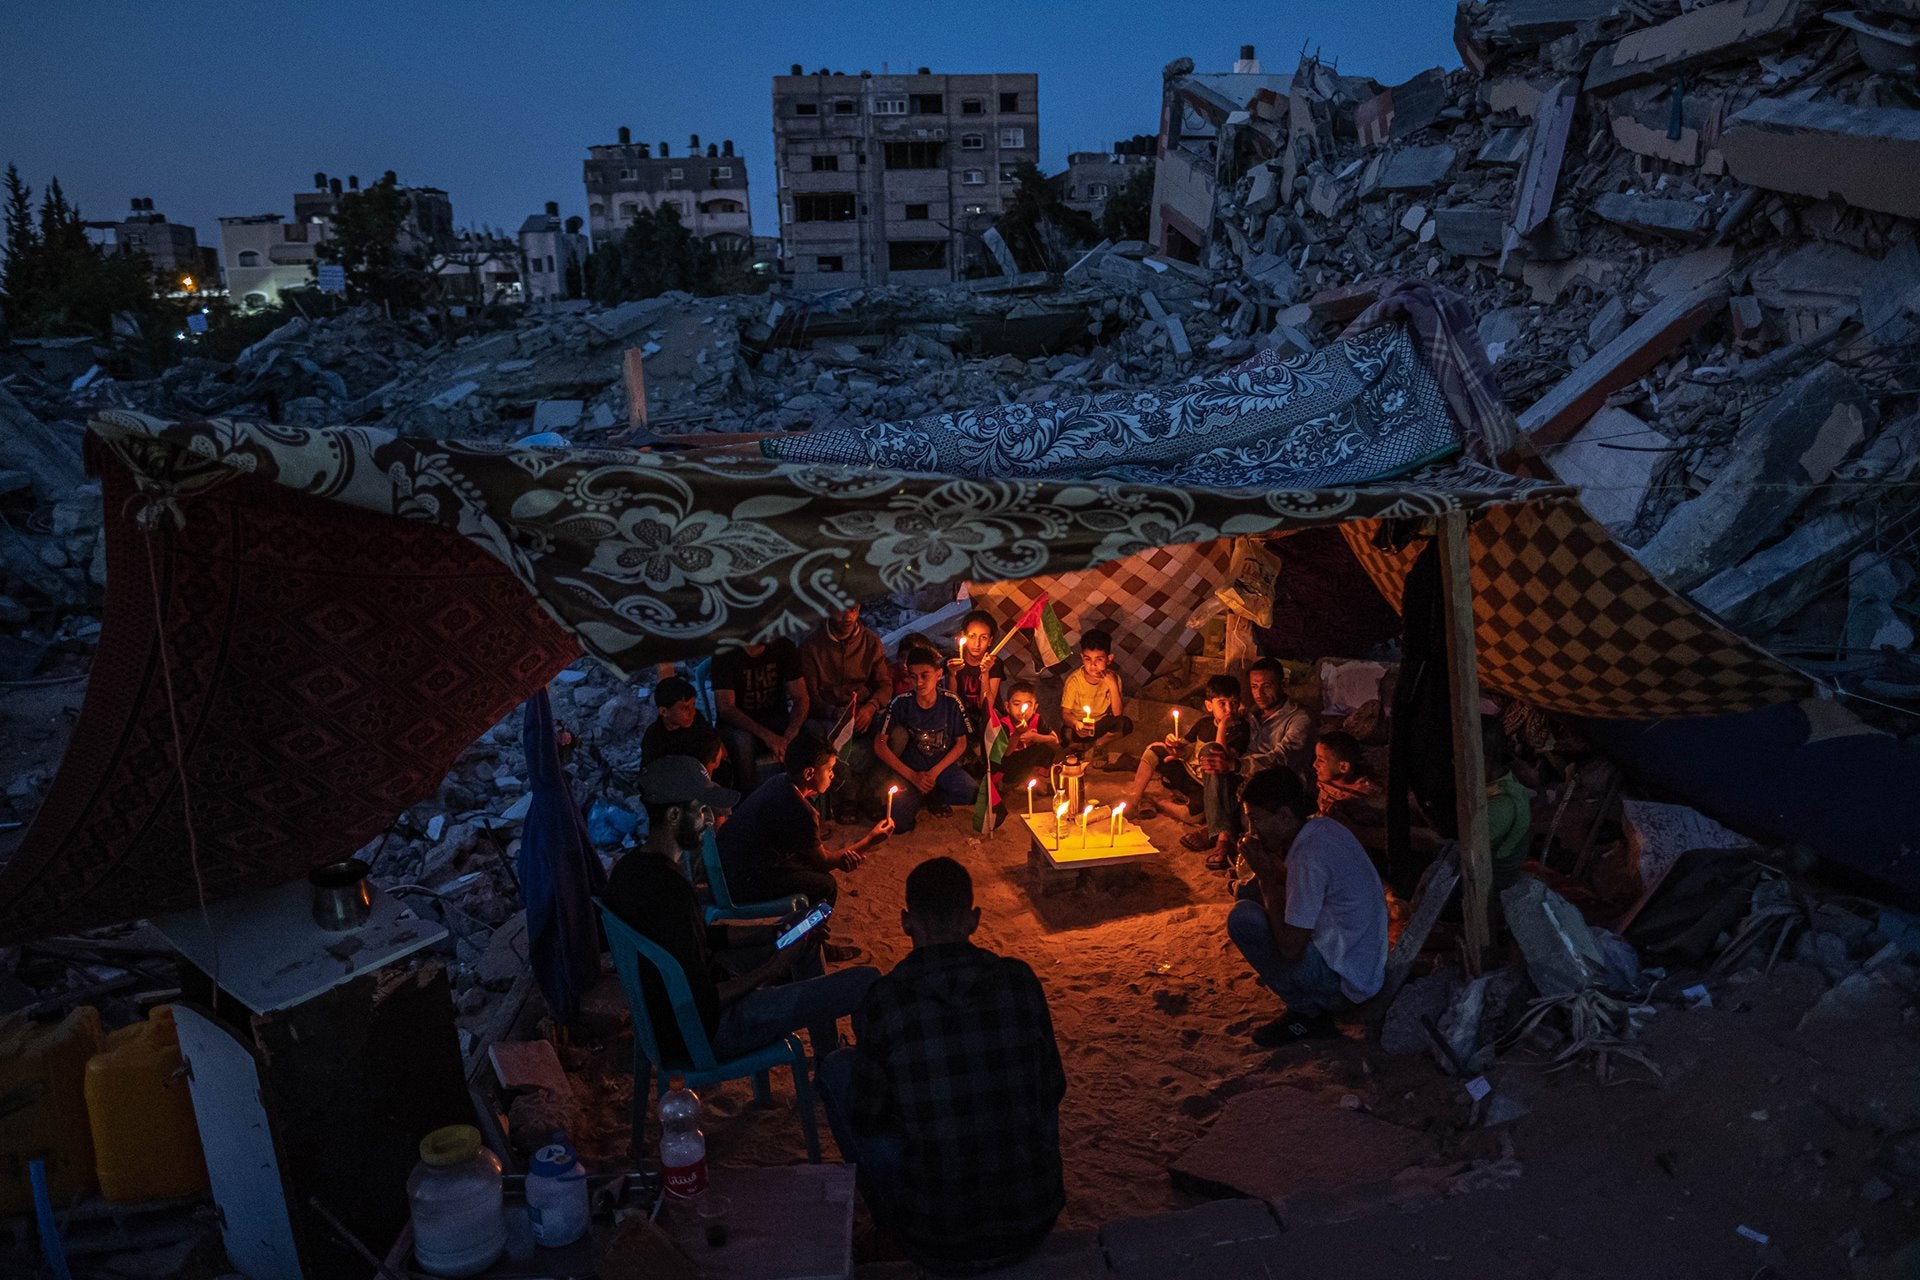 Palestinian photographer Fatima Shbair won the Singles category for this photo of Palestinian children gathering with candles in Gaza.